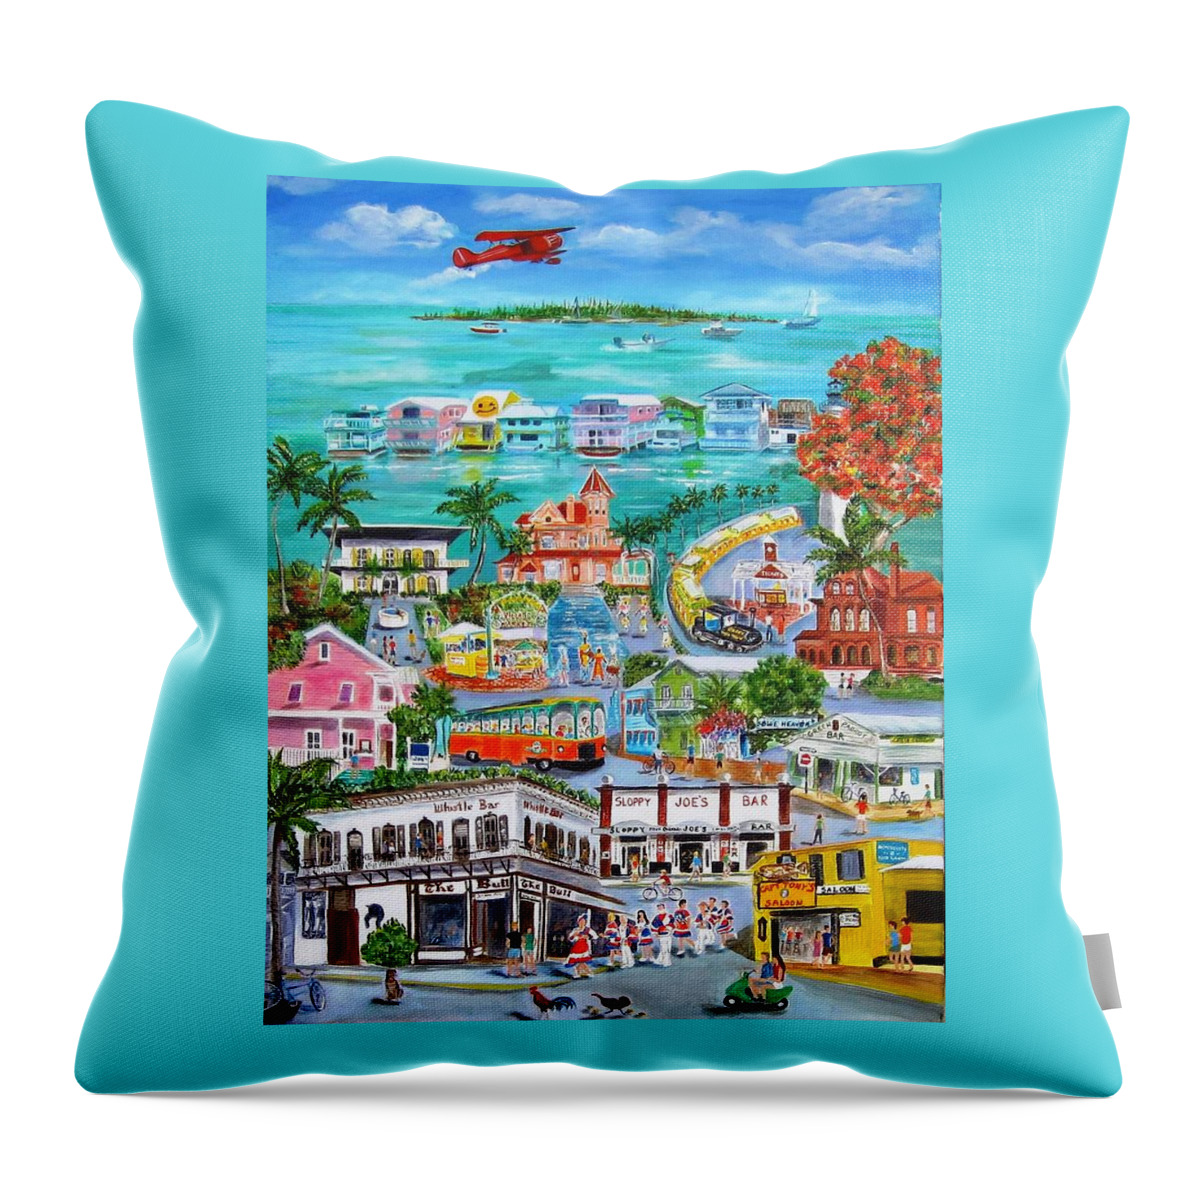 Key West Throw Pillow featuring the painting Island Daze by Linda Cabrera